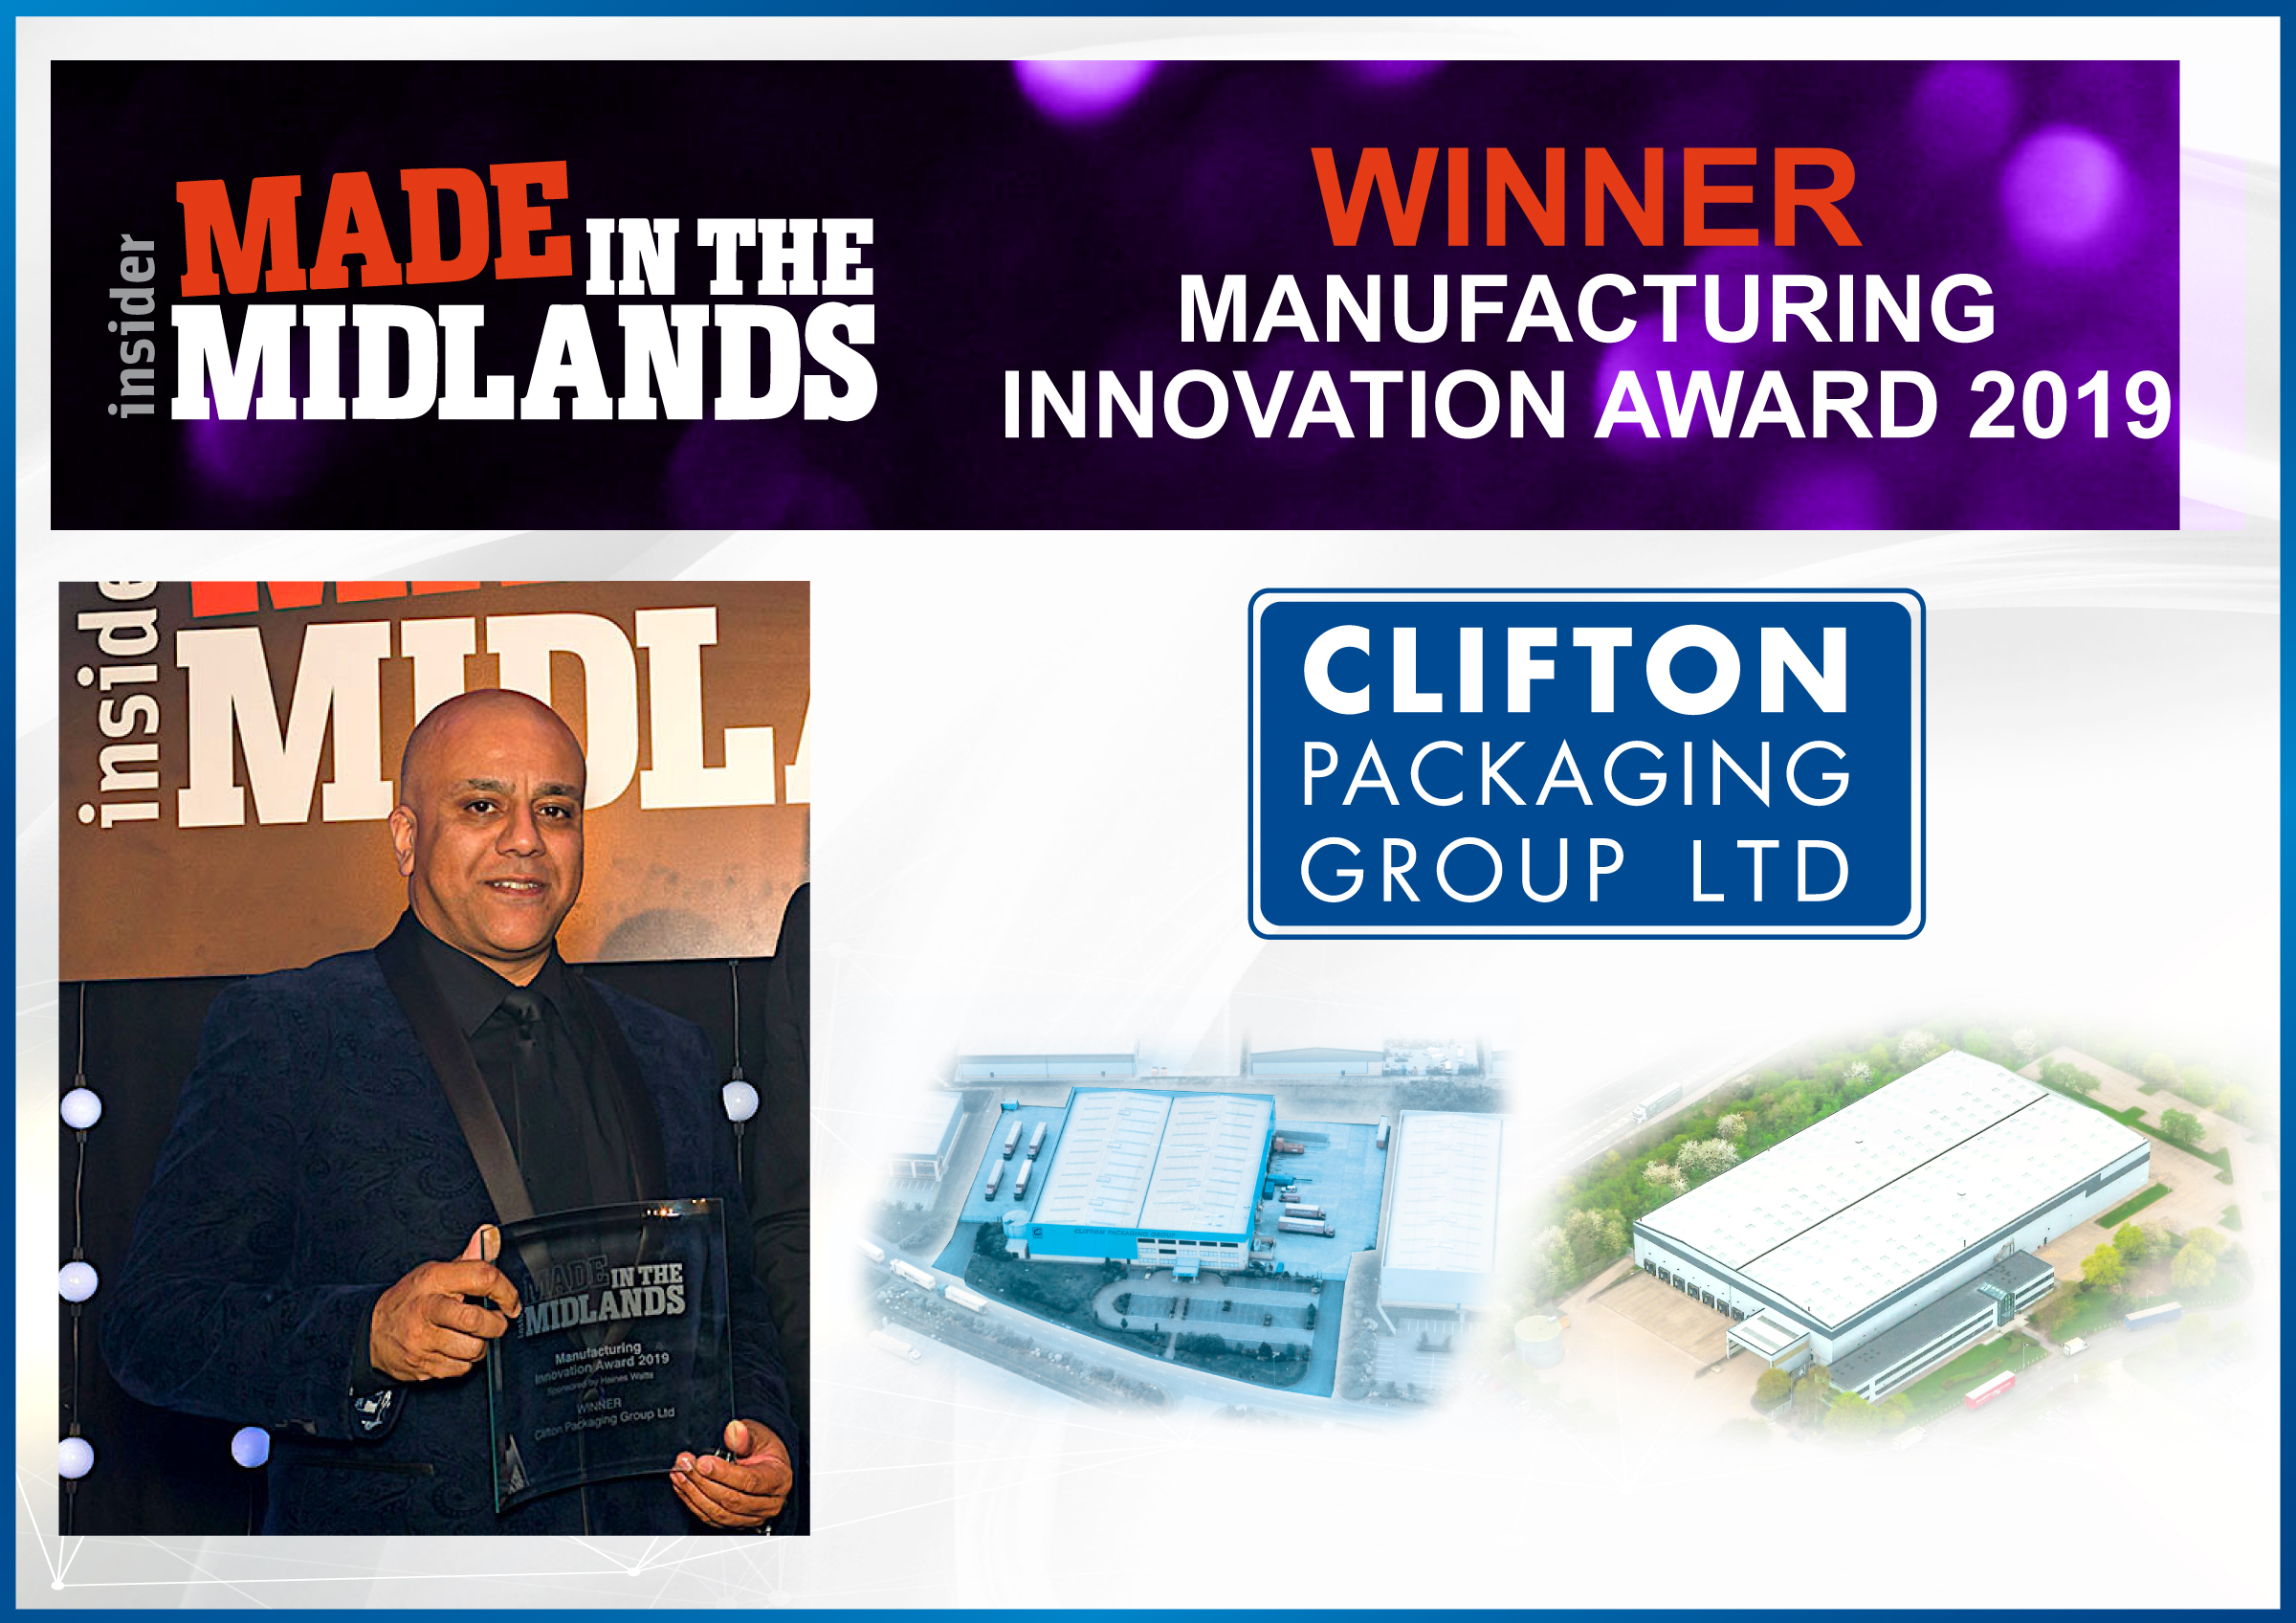 Made in the Midlands, Manufacturing Innovation WINNER 2019